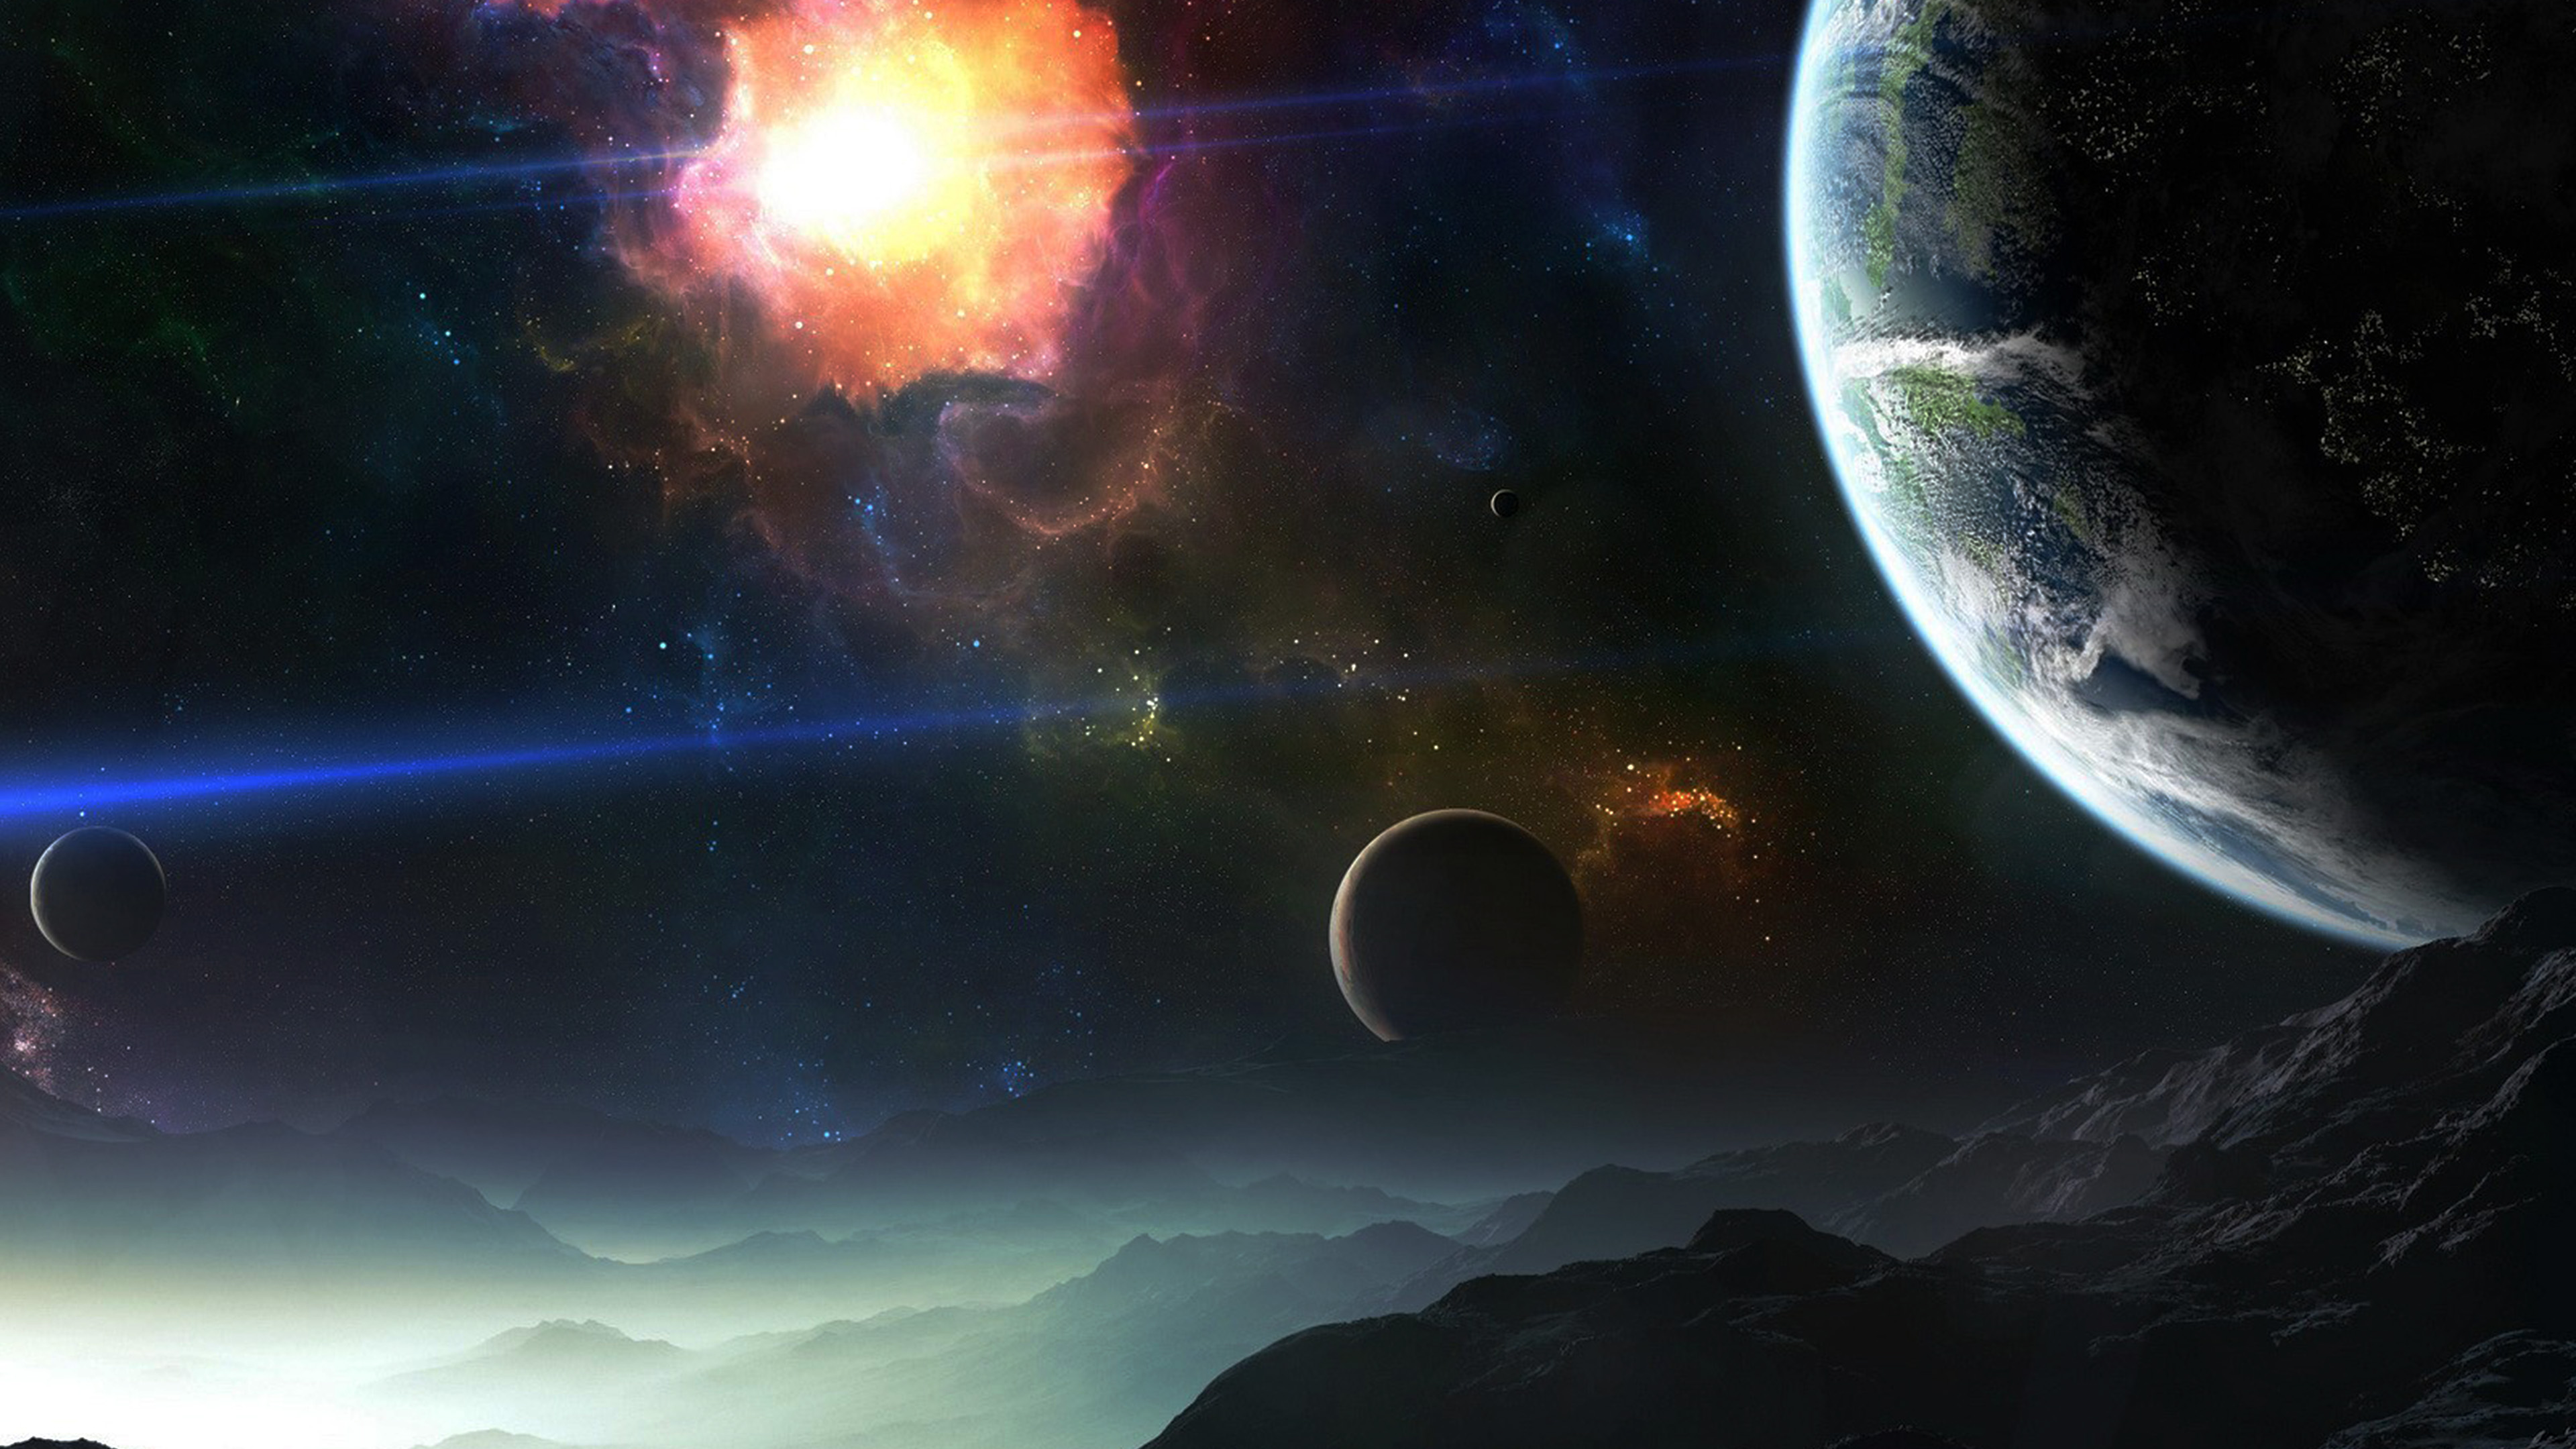 Outer Space Backgrounds Hd - HD Wallpaper 